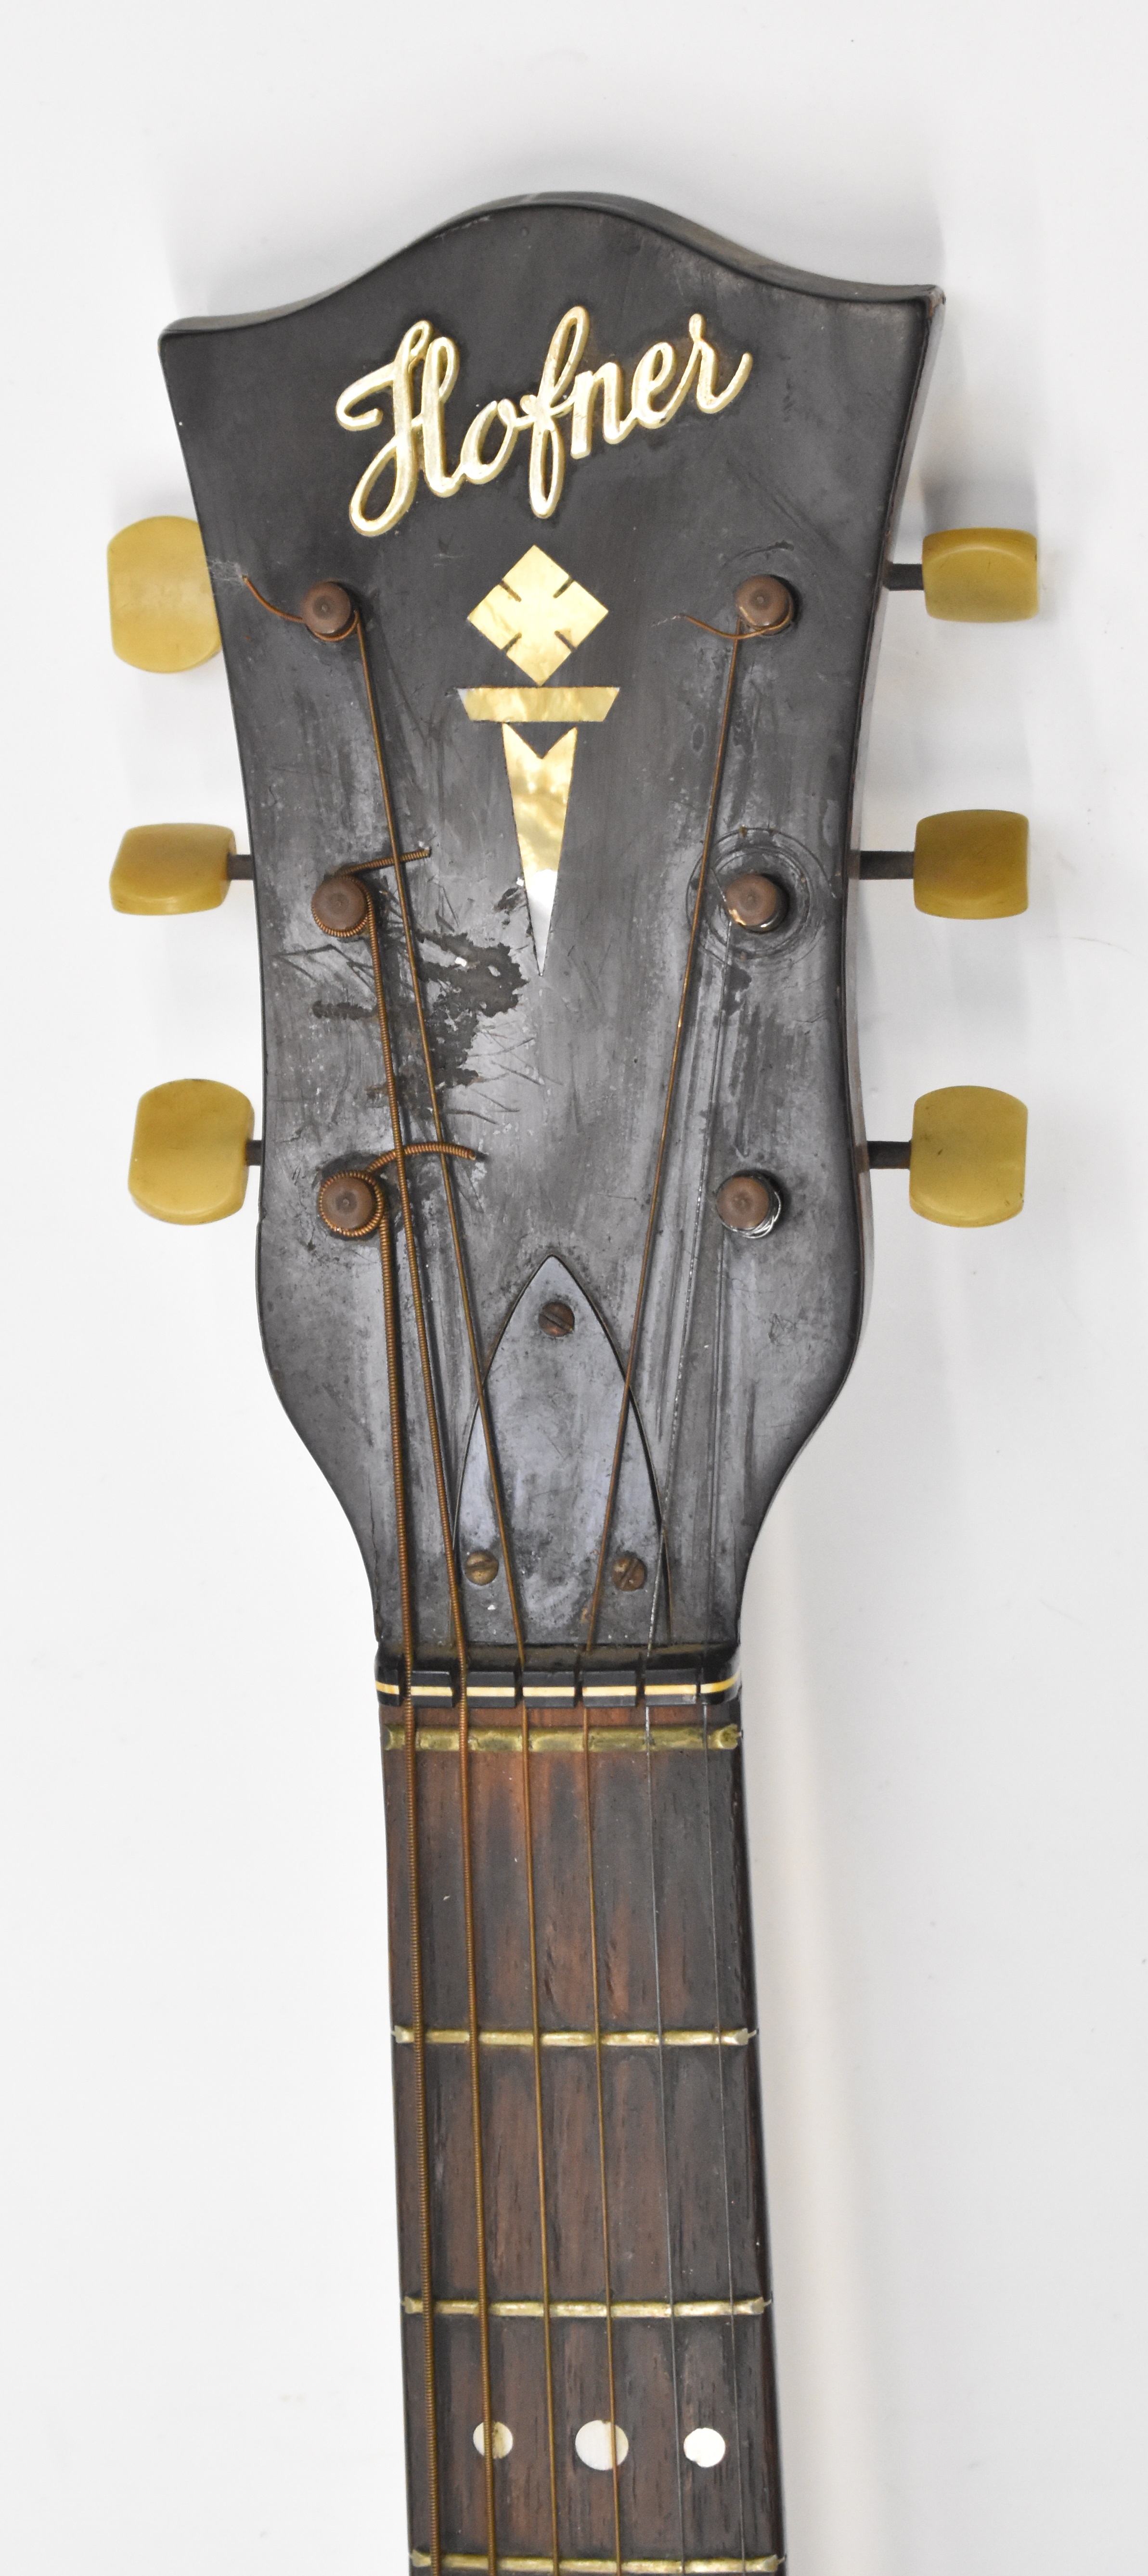 Hofner Senator acoustic guitar with faux ivory and mother of pearl decoration, length 105cm - Image 3 of 9